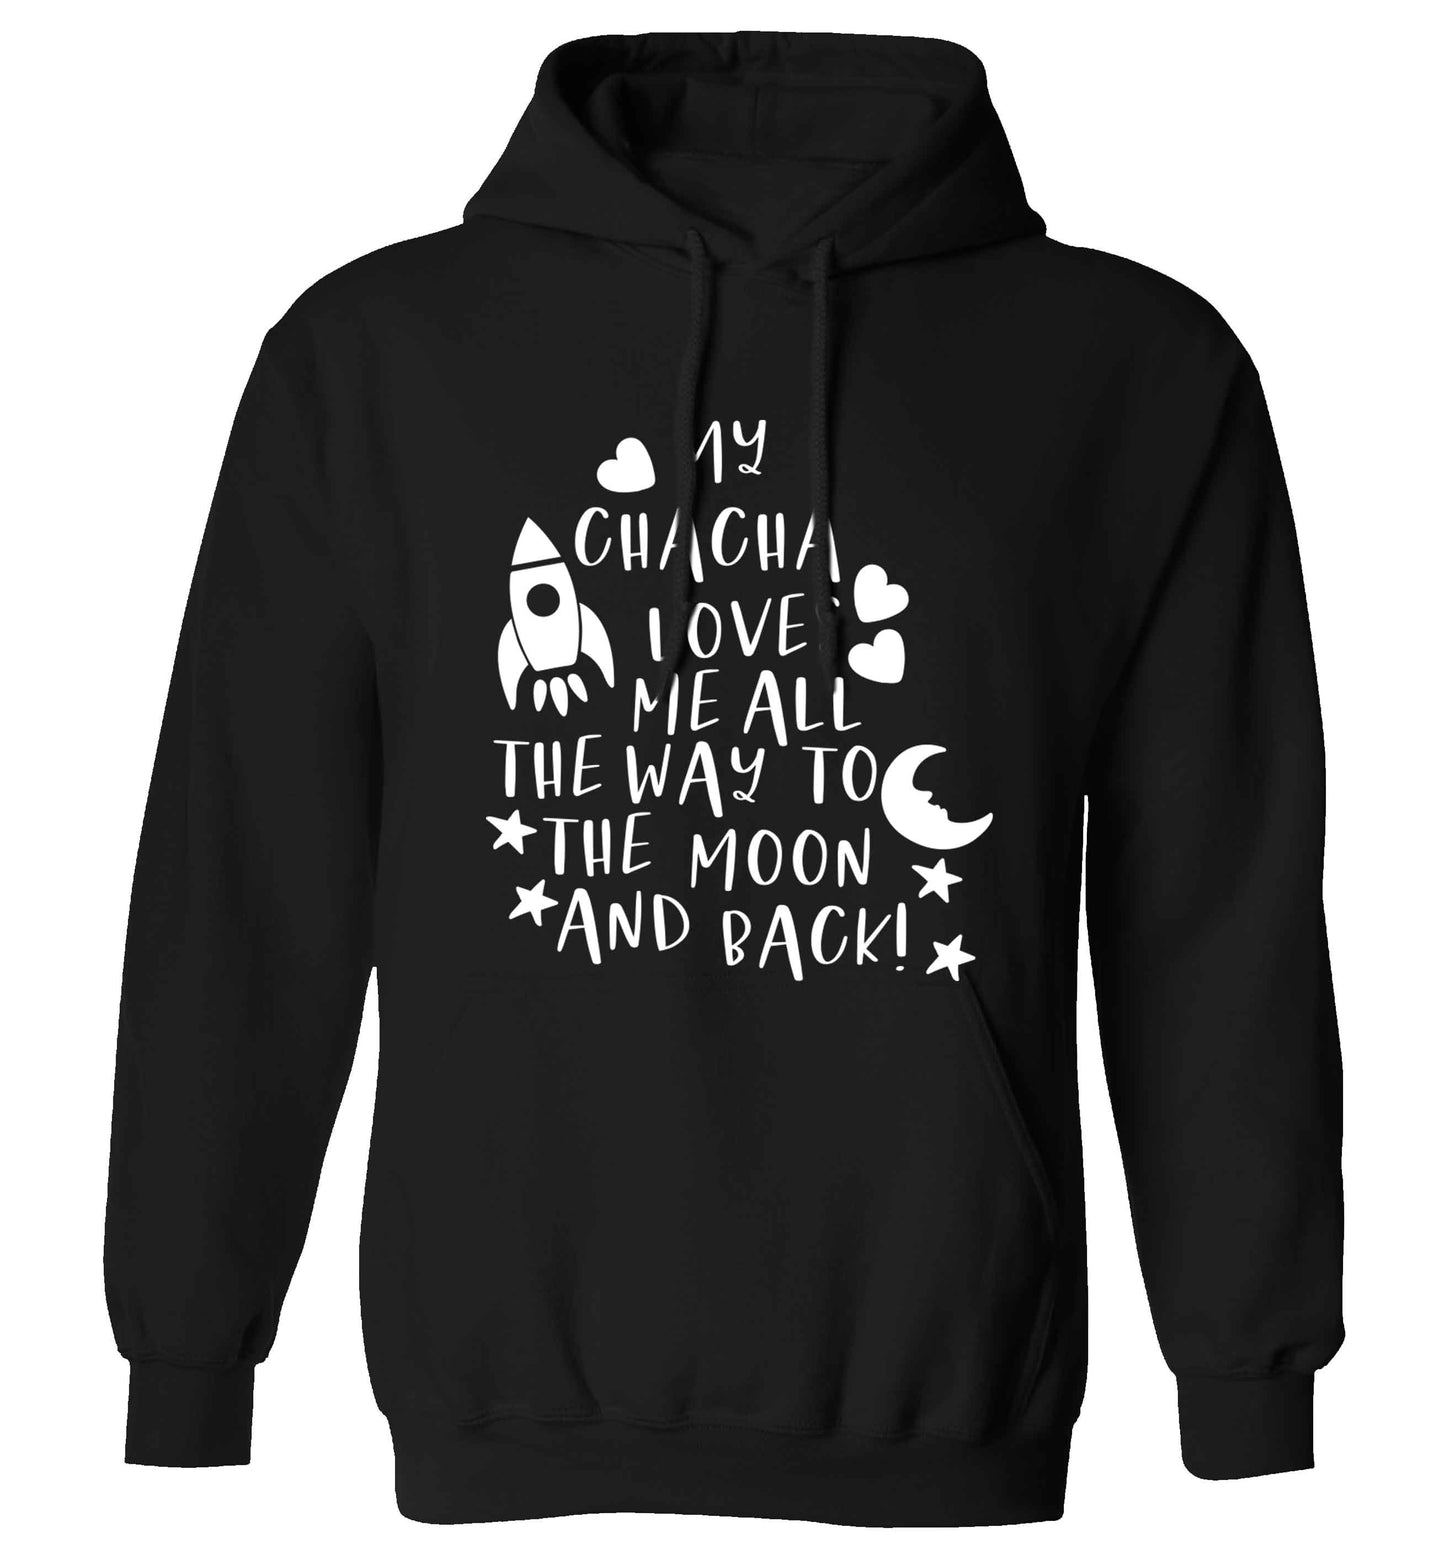 My chacha loves me all the way to the moon and back adults unisex black hoodie 2XL